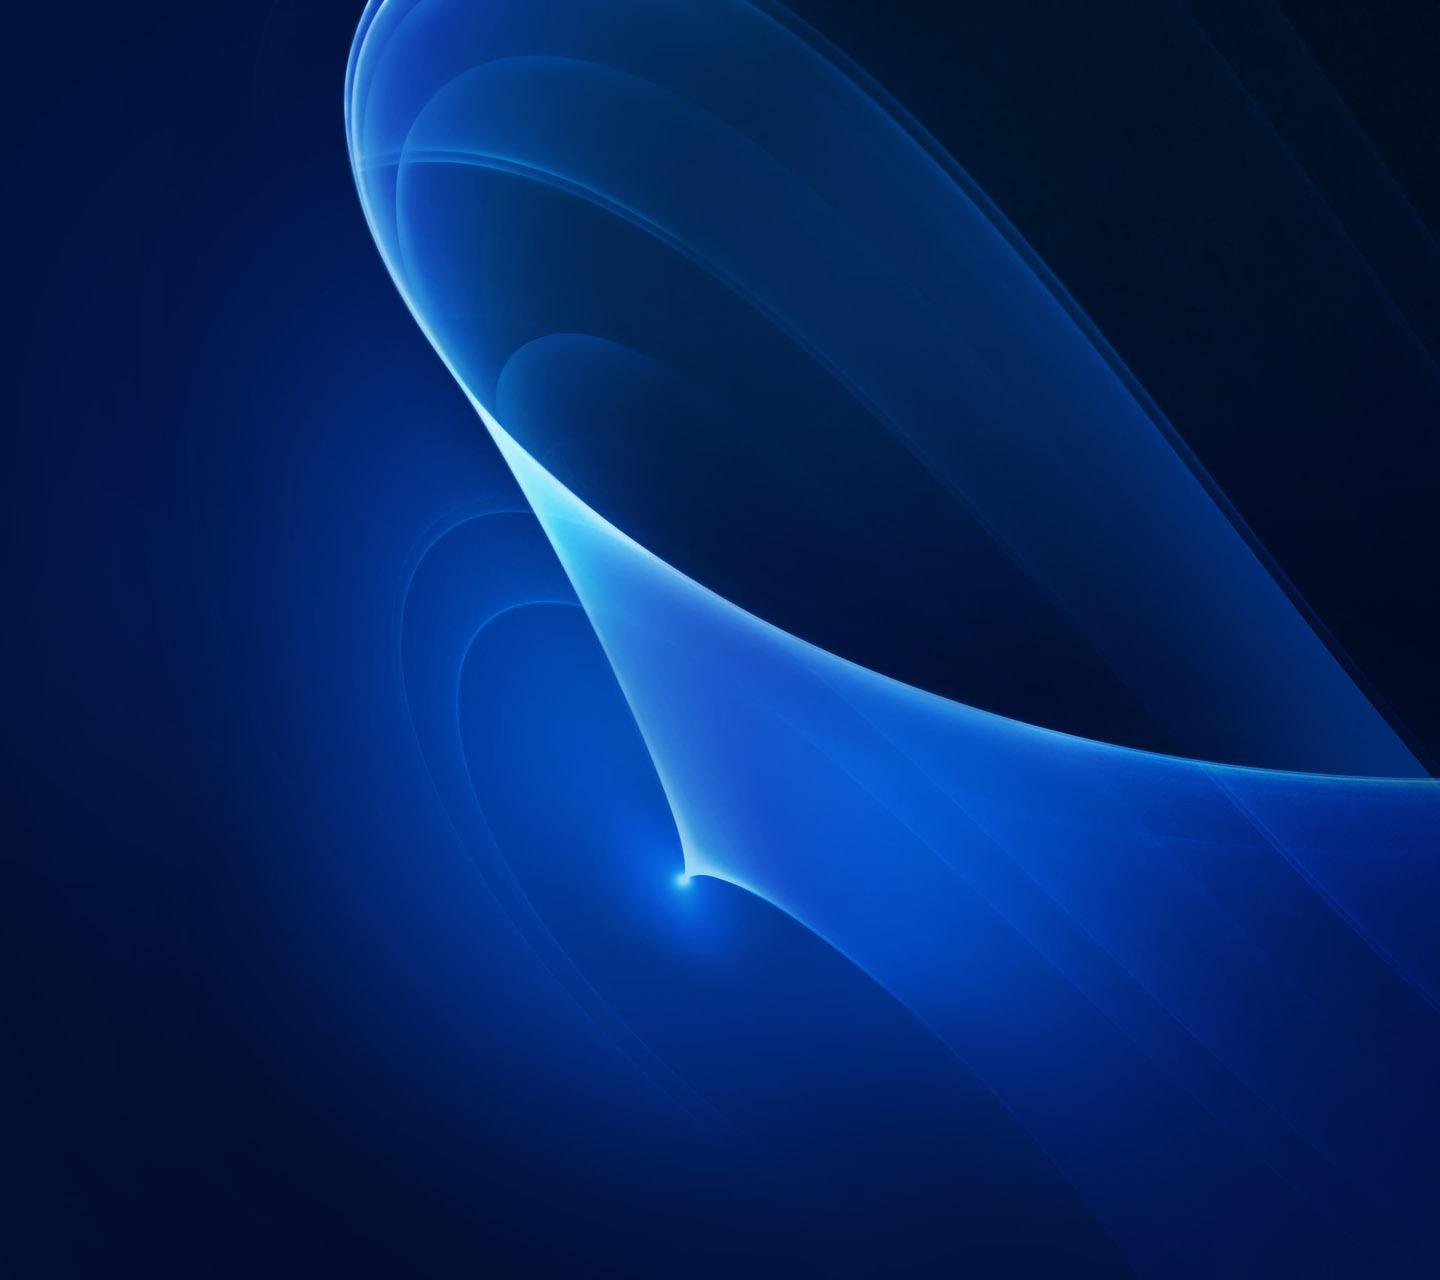 HD Wallpaper for Samsung for Android - APK Download